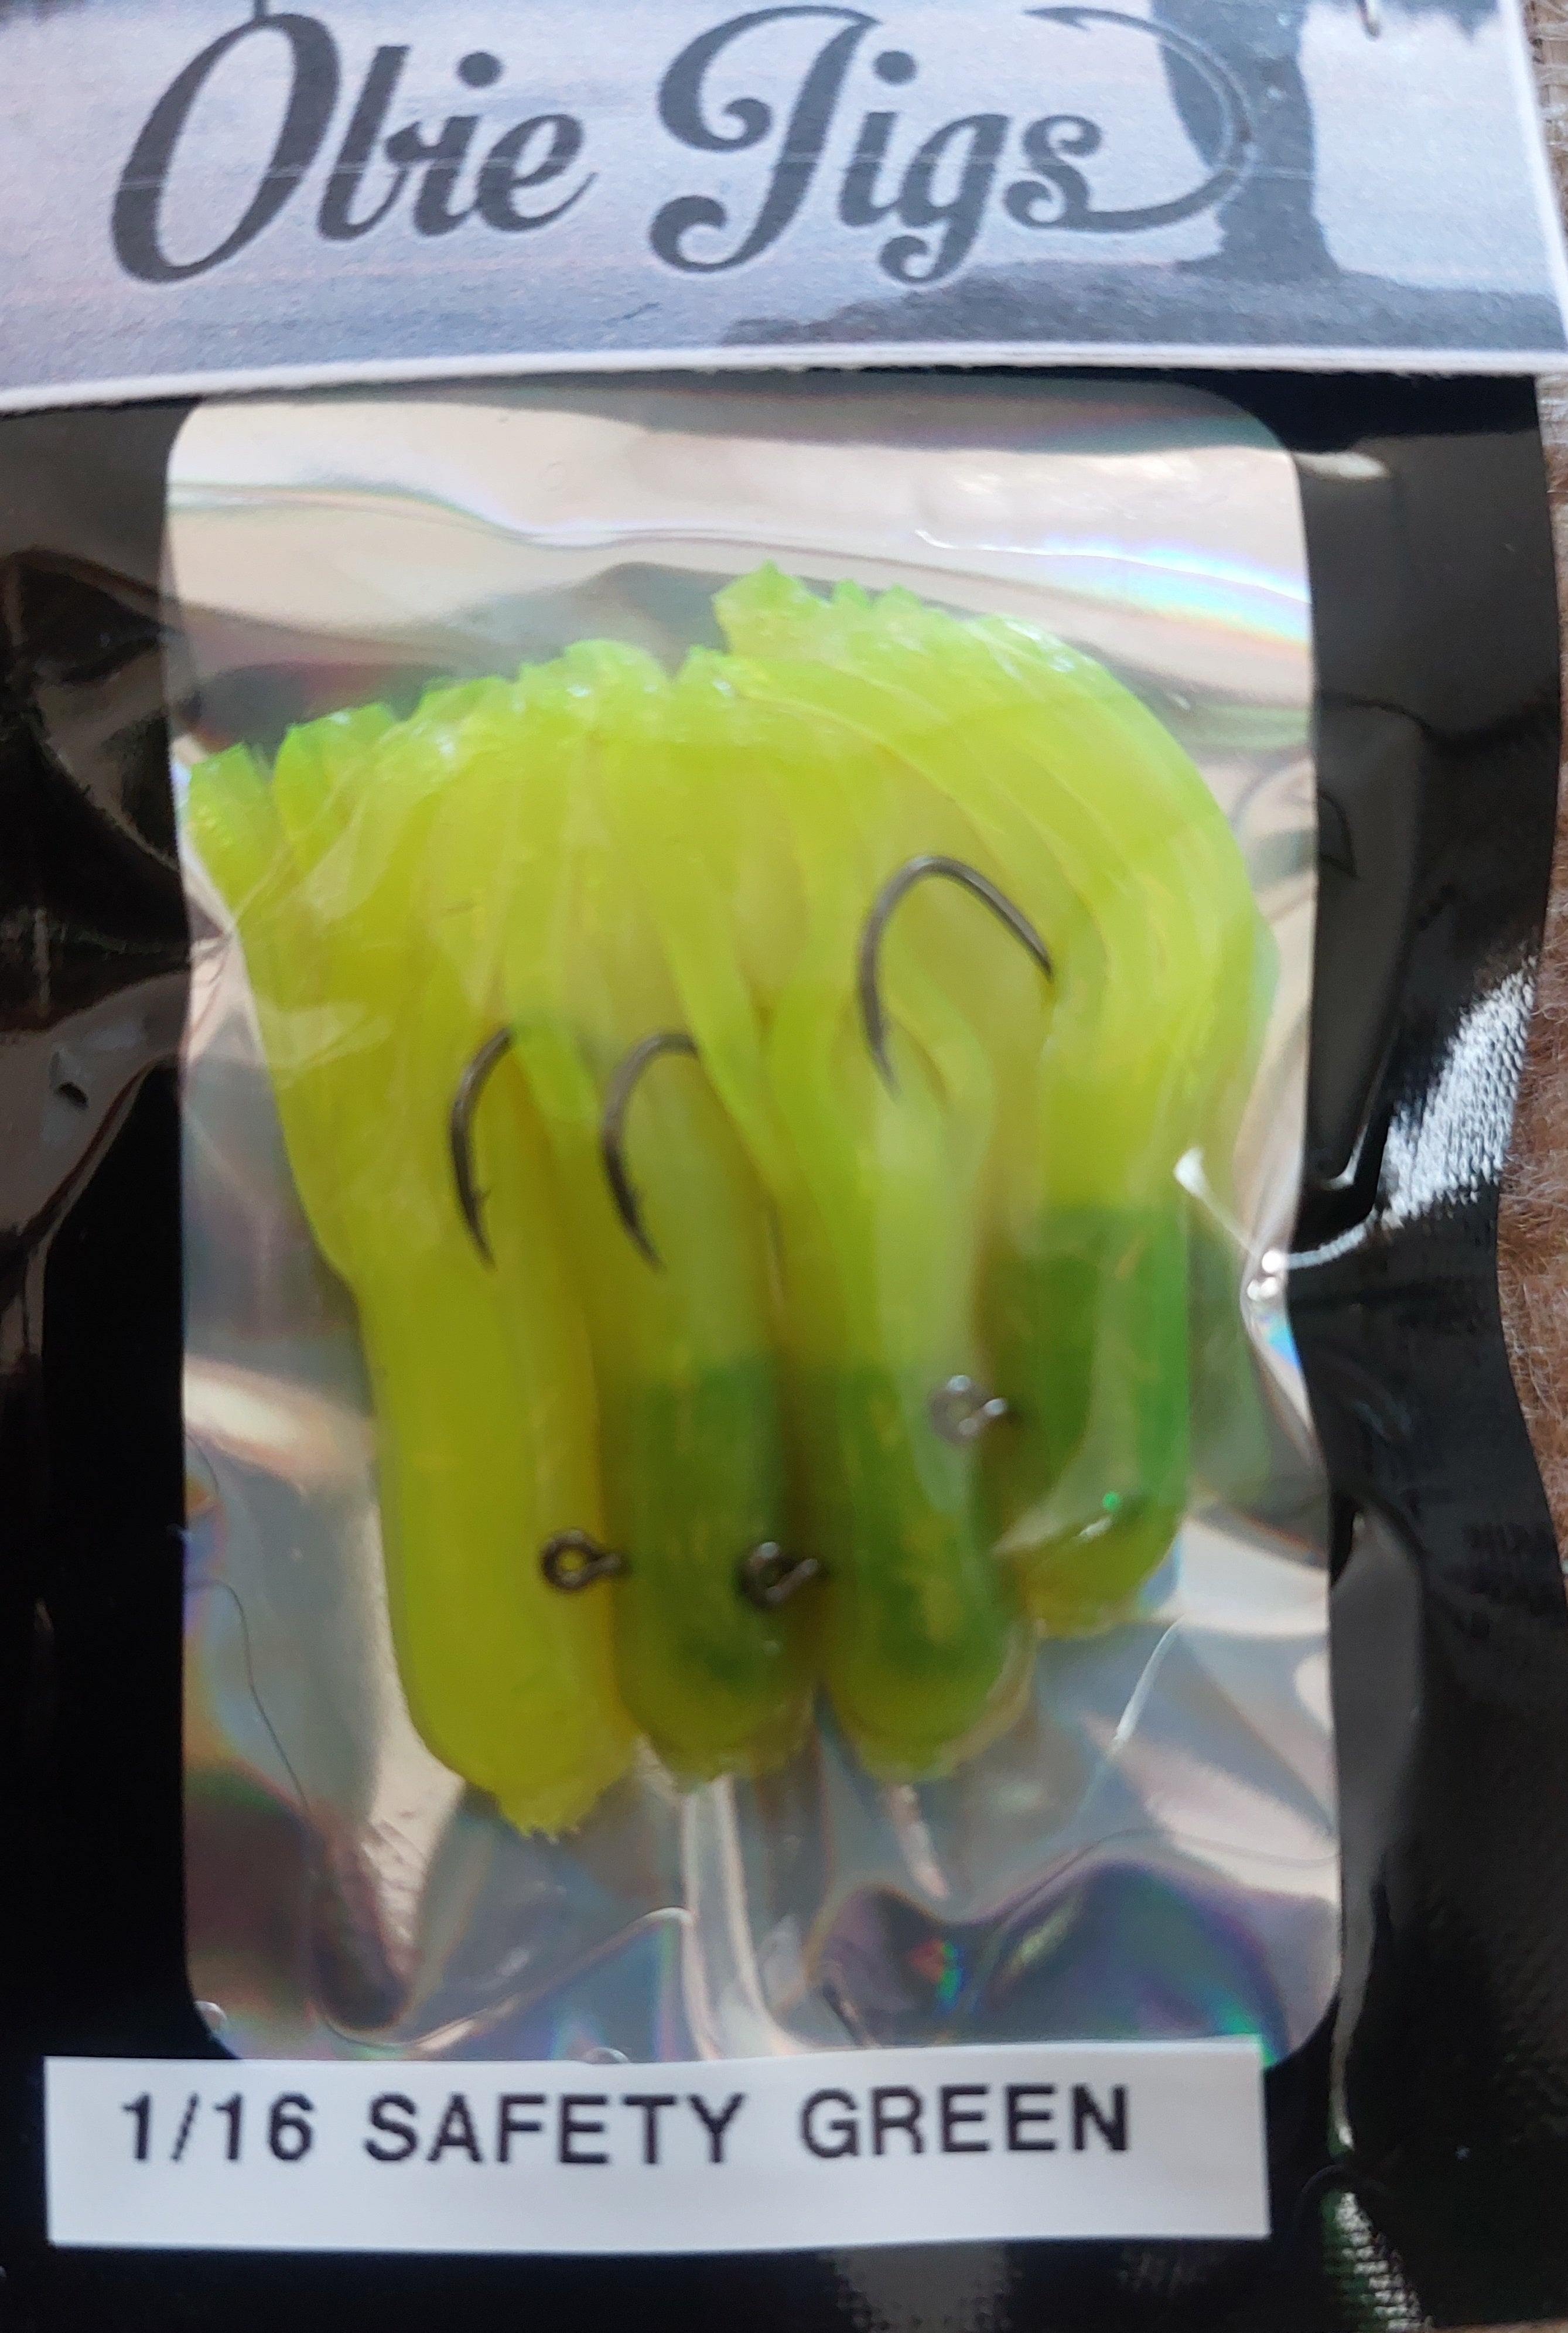 Safety Green 1.5 Tube Jigs